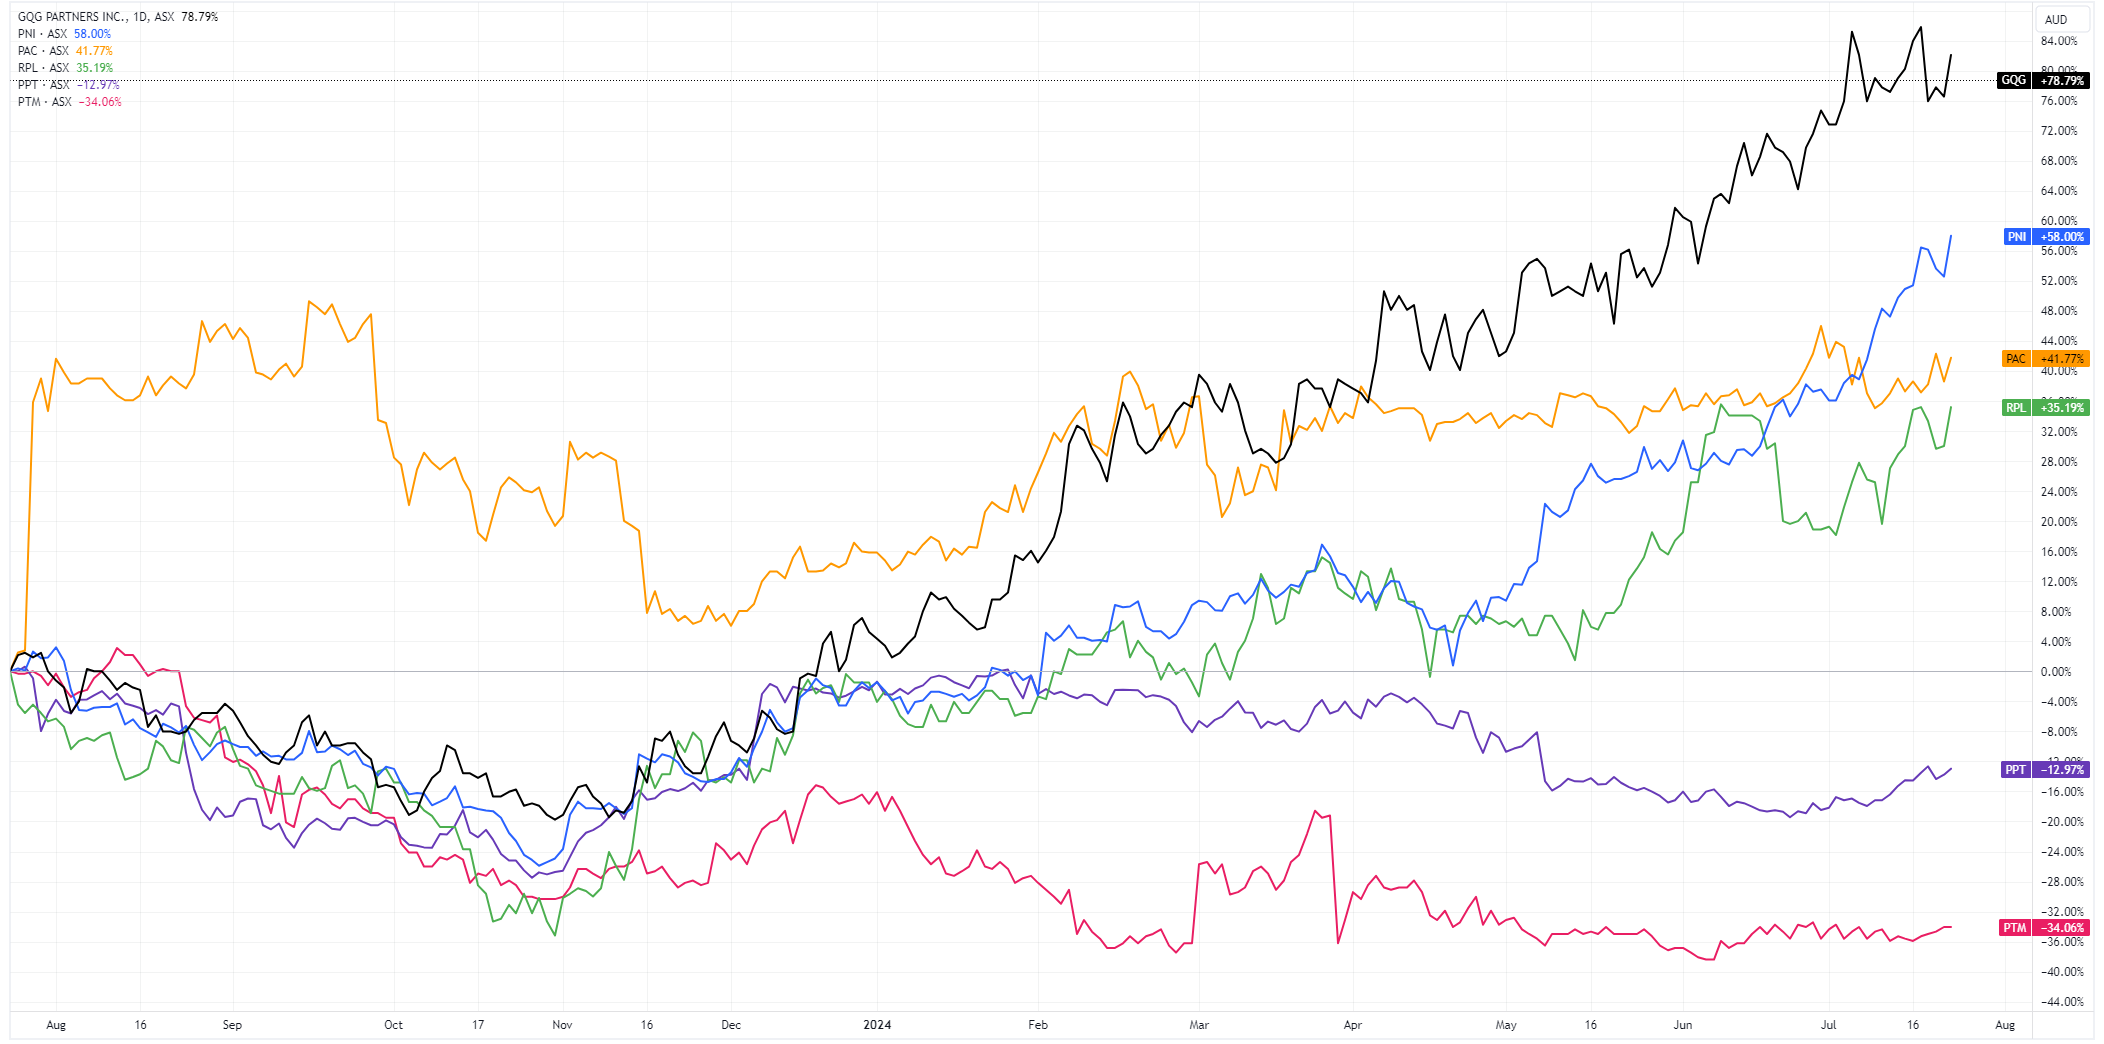 1-year share price performance comparison - GQG, PNI, PAC, RPL, PPT, PTM (Source: TradingView)